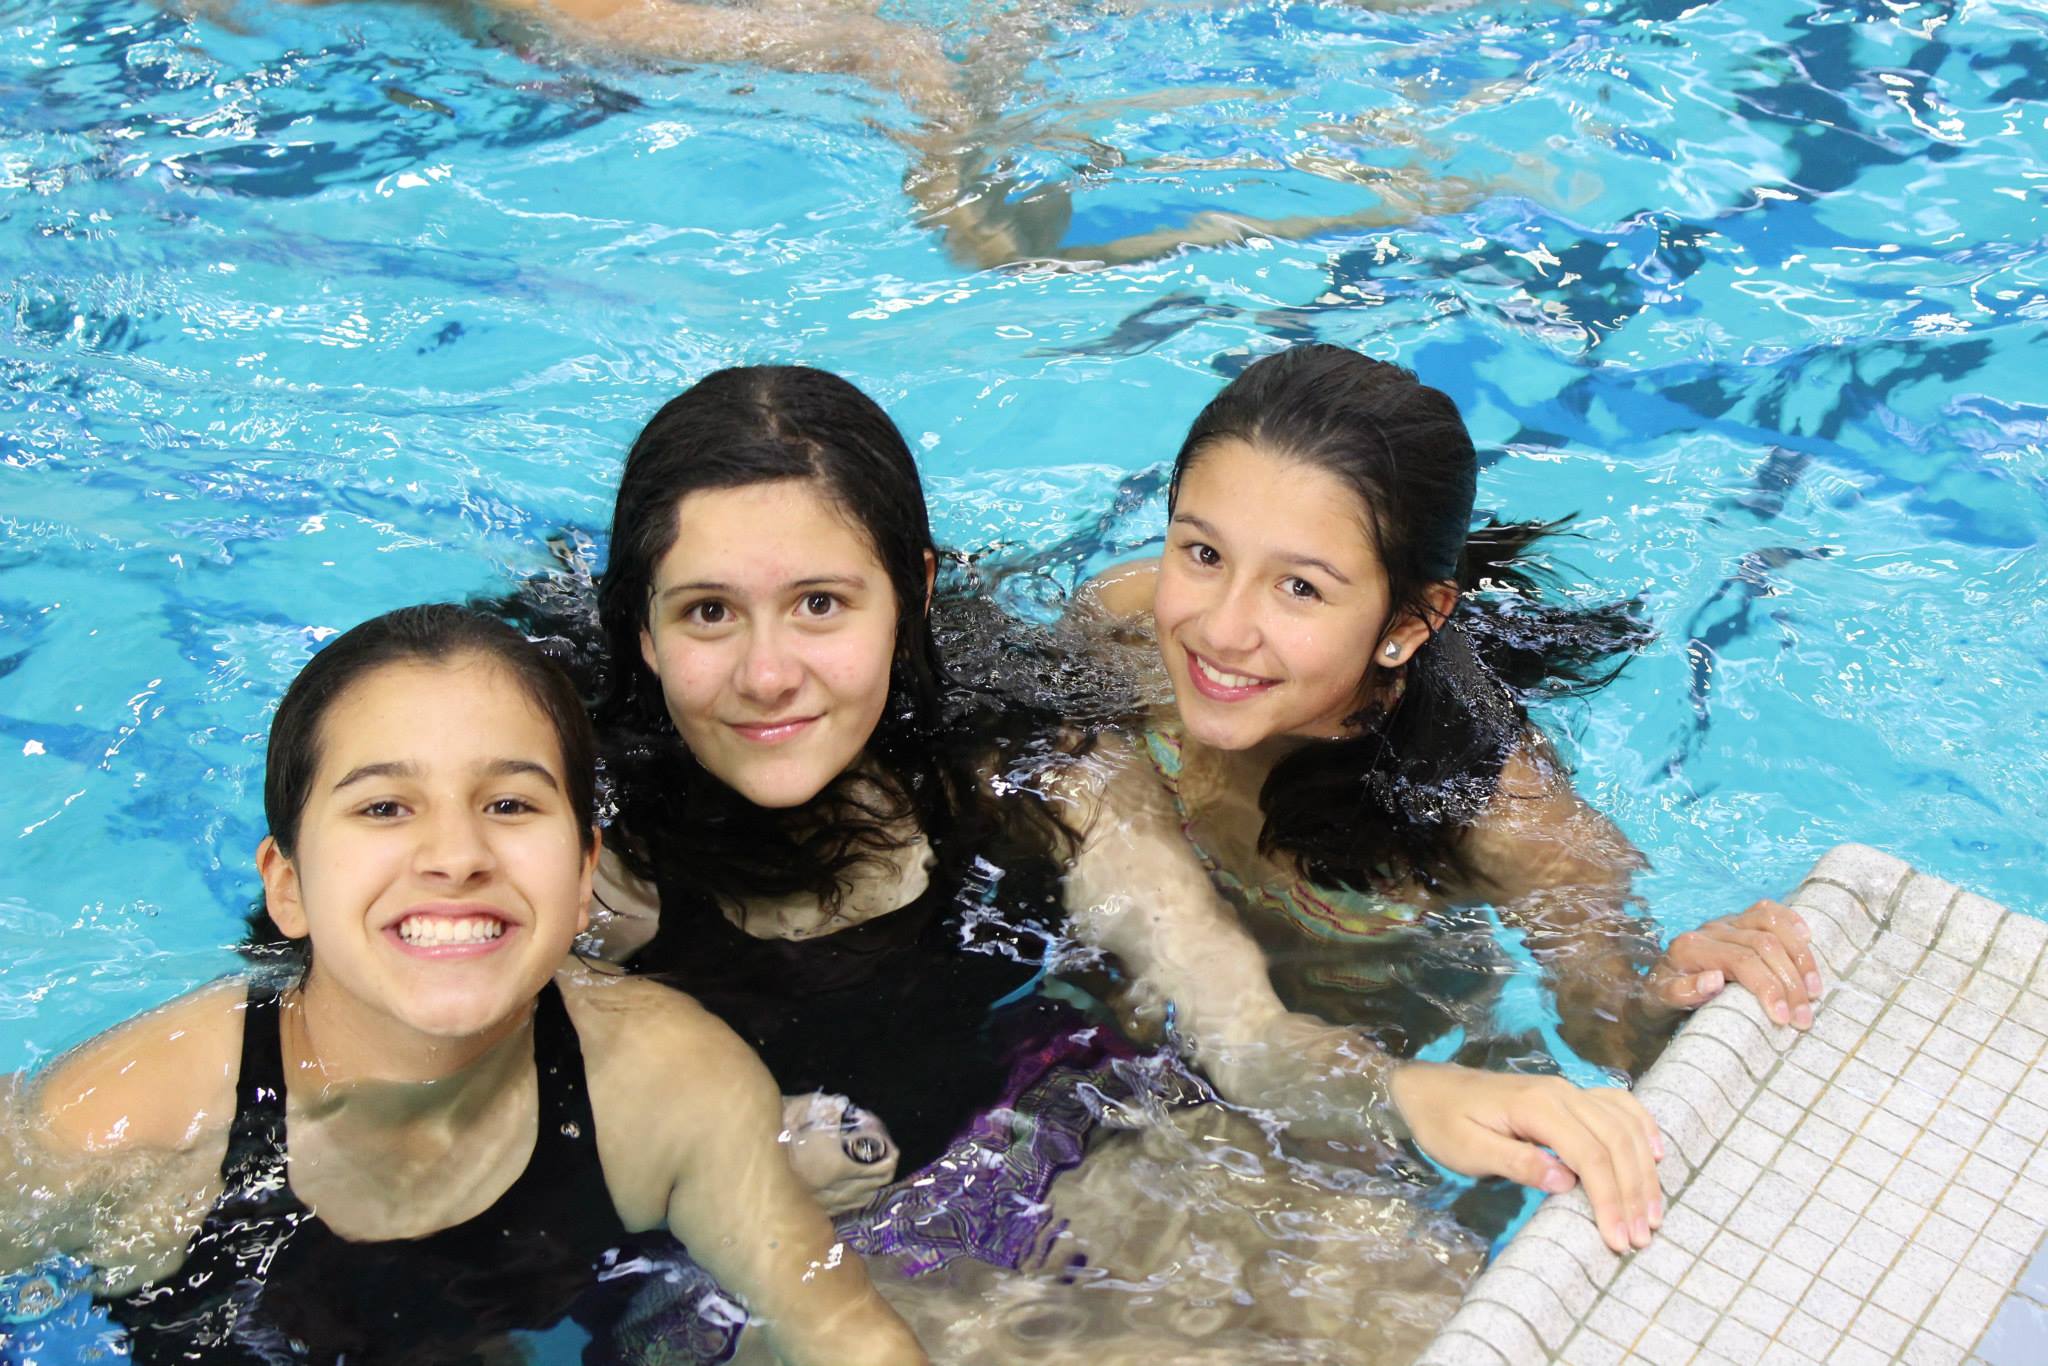 Kids at Destination Canada have fun in Carleton University’s Olympic-sized pool